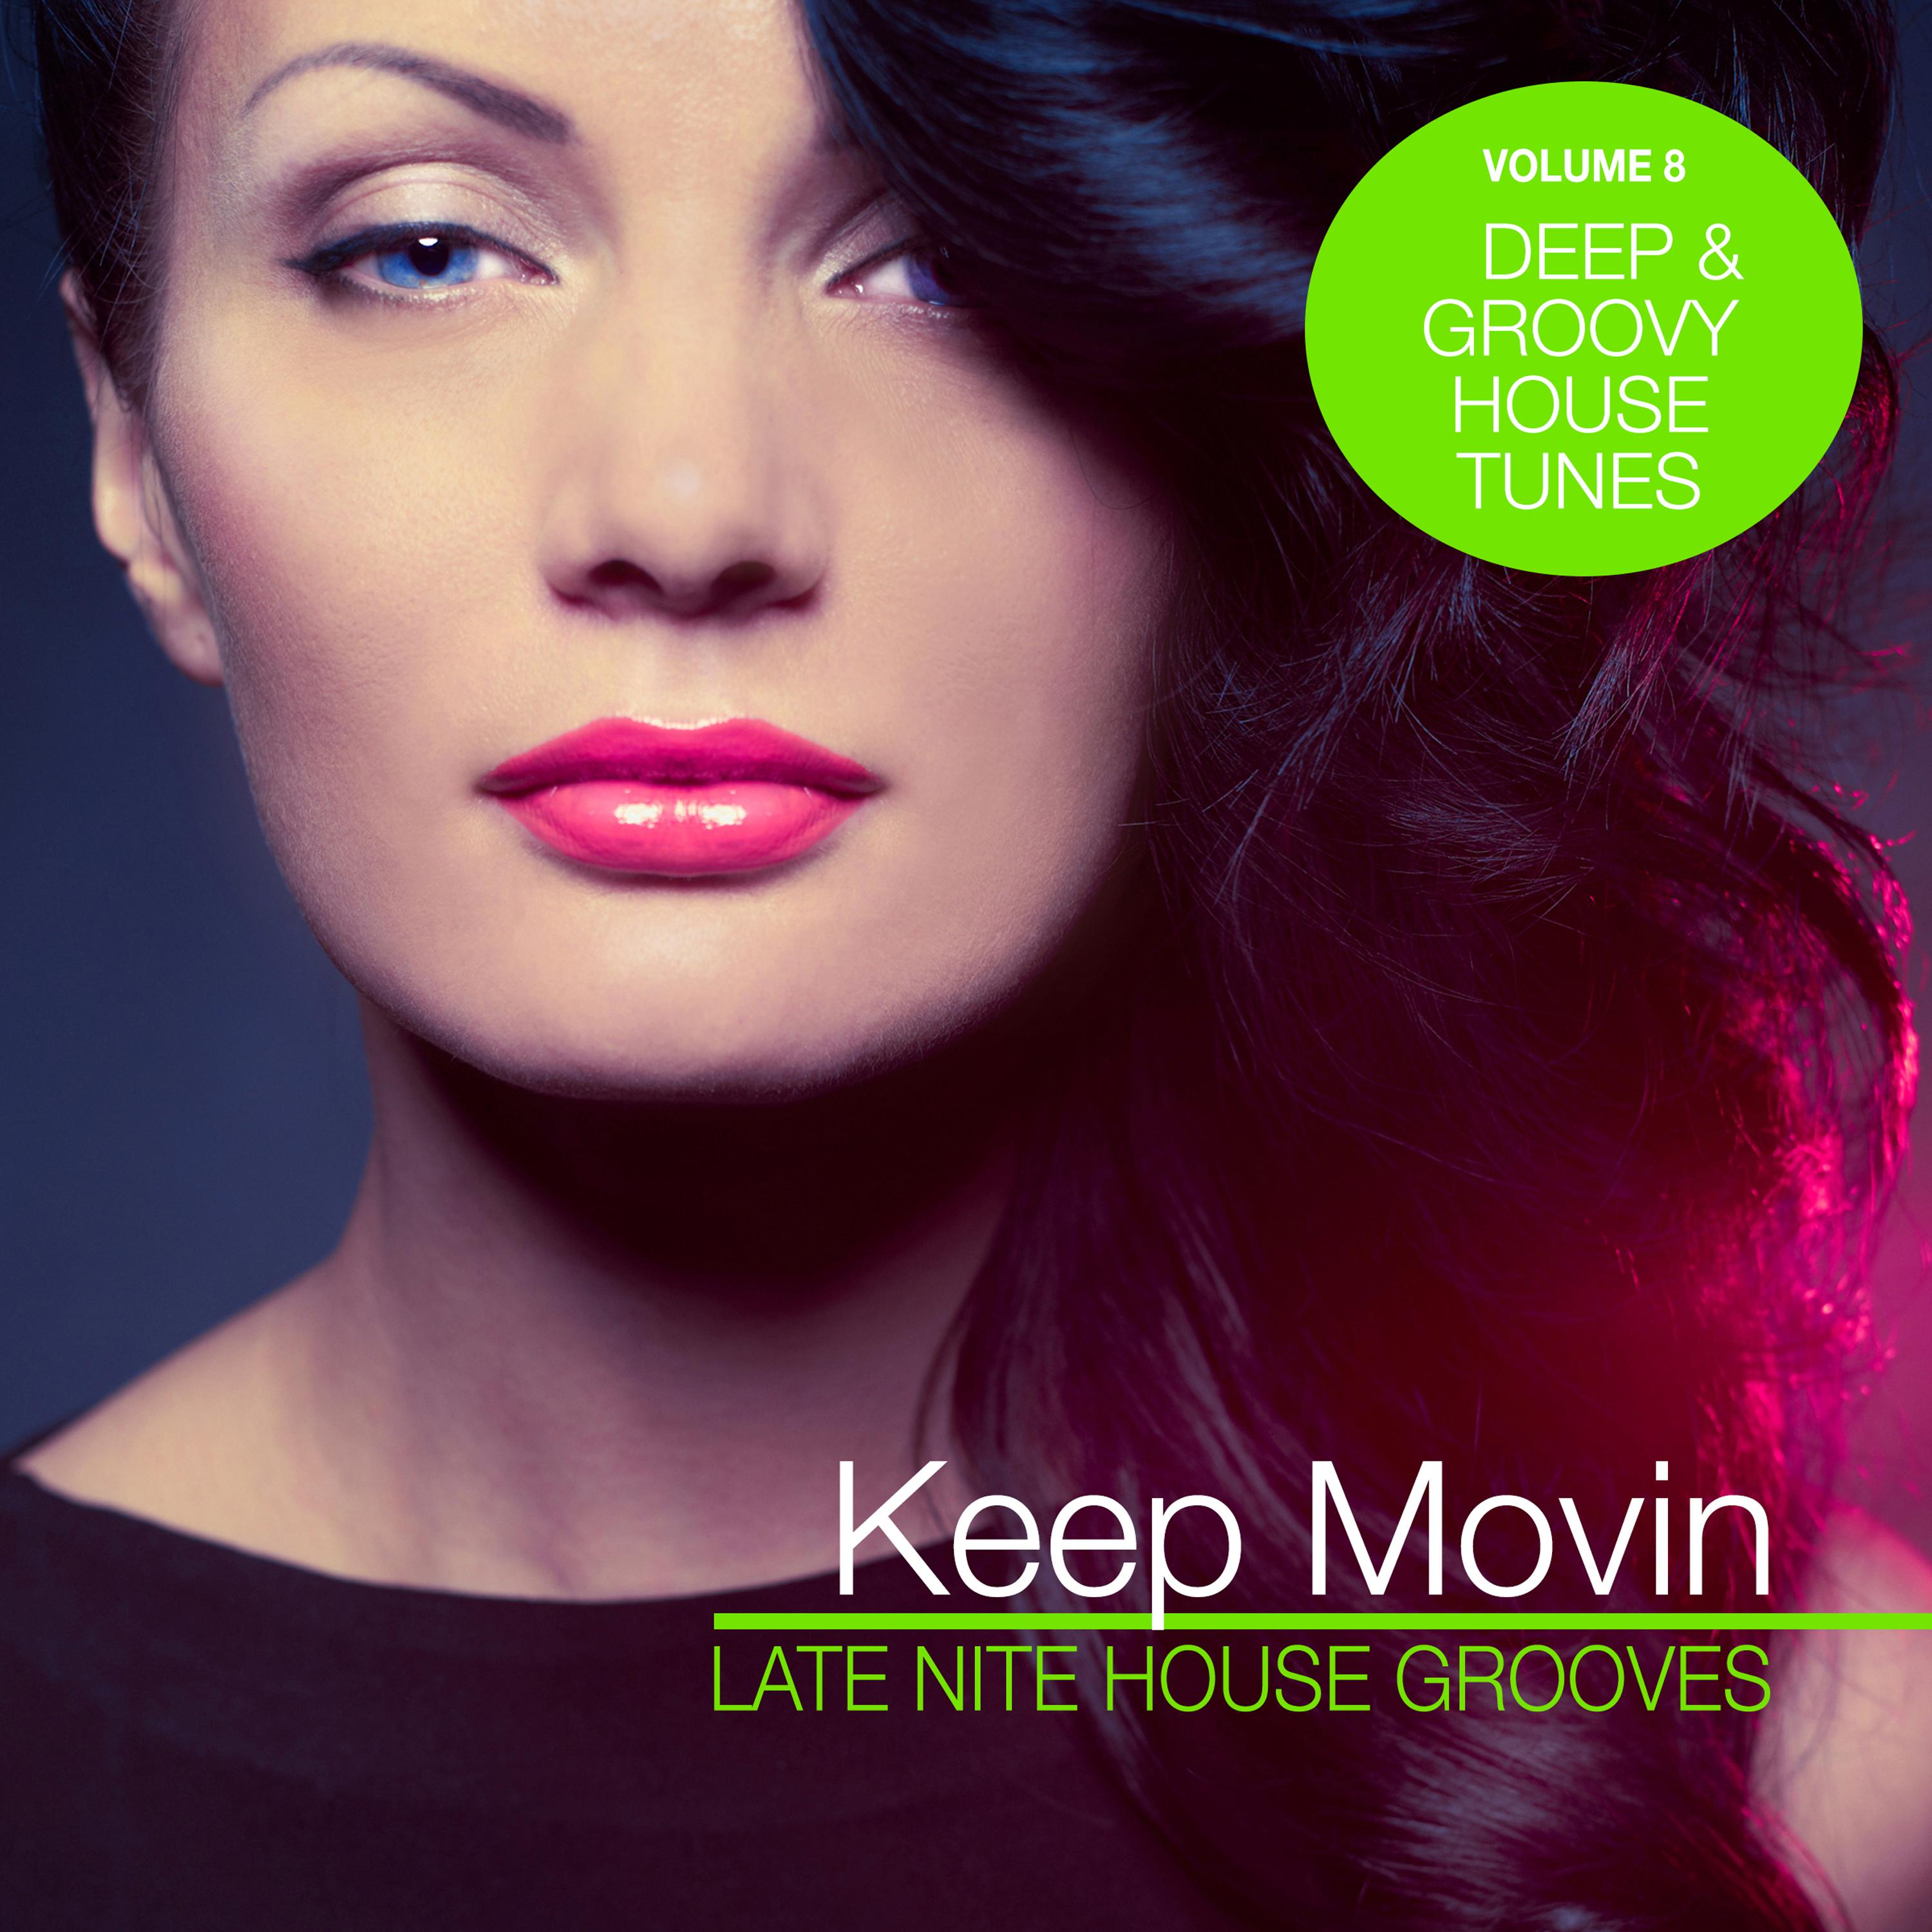 Keep Movin  Late Nite House Grooves, Vol. 8